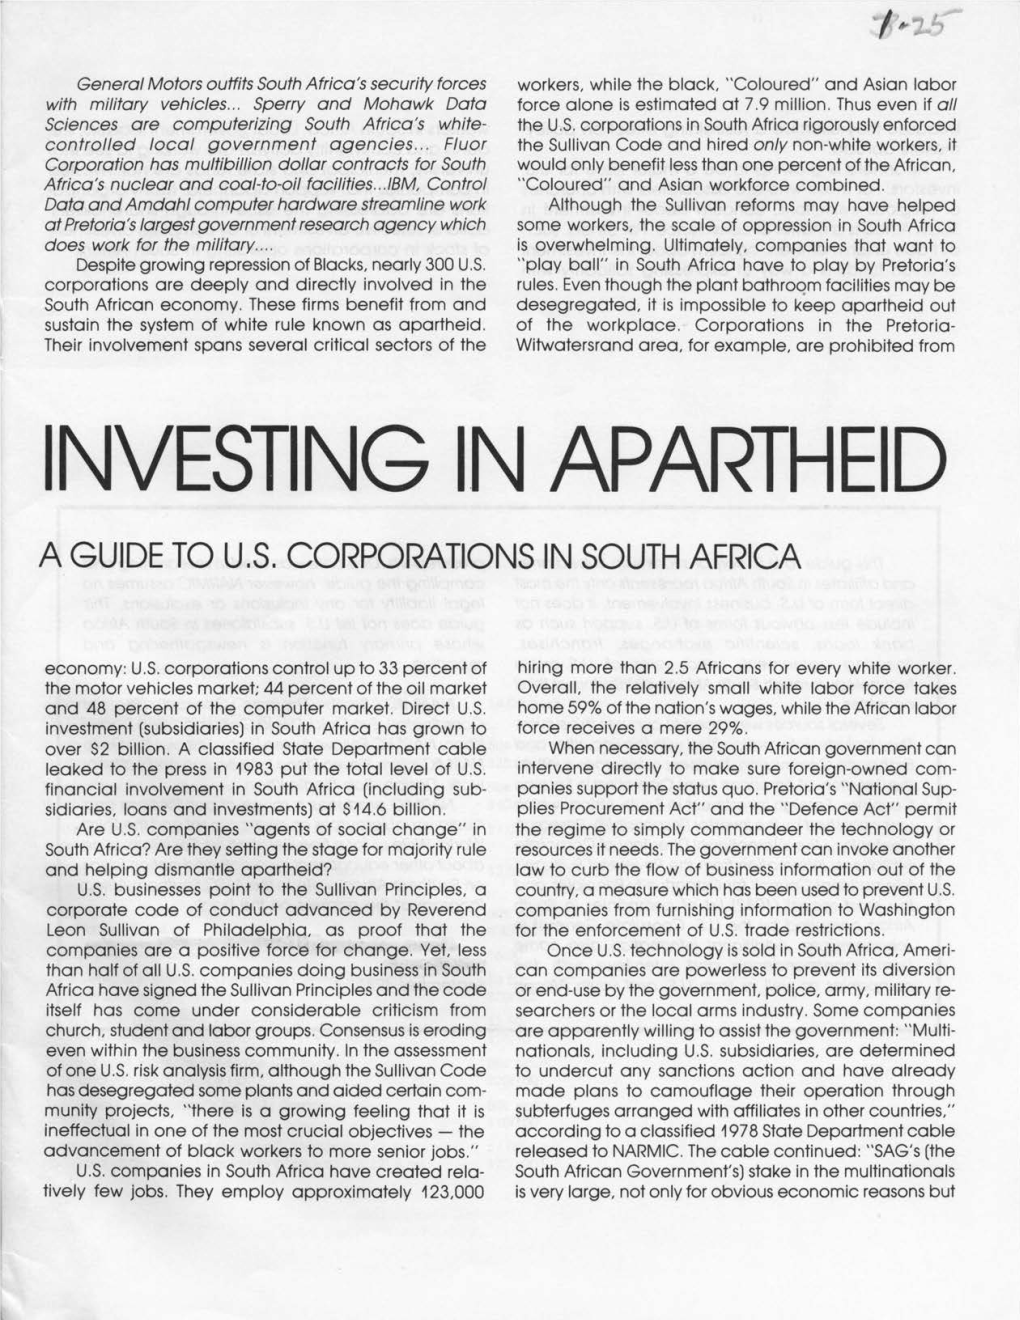 Investing in Apartheid a Guide to U.S